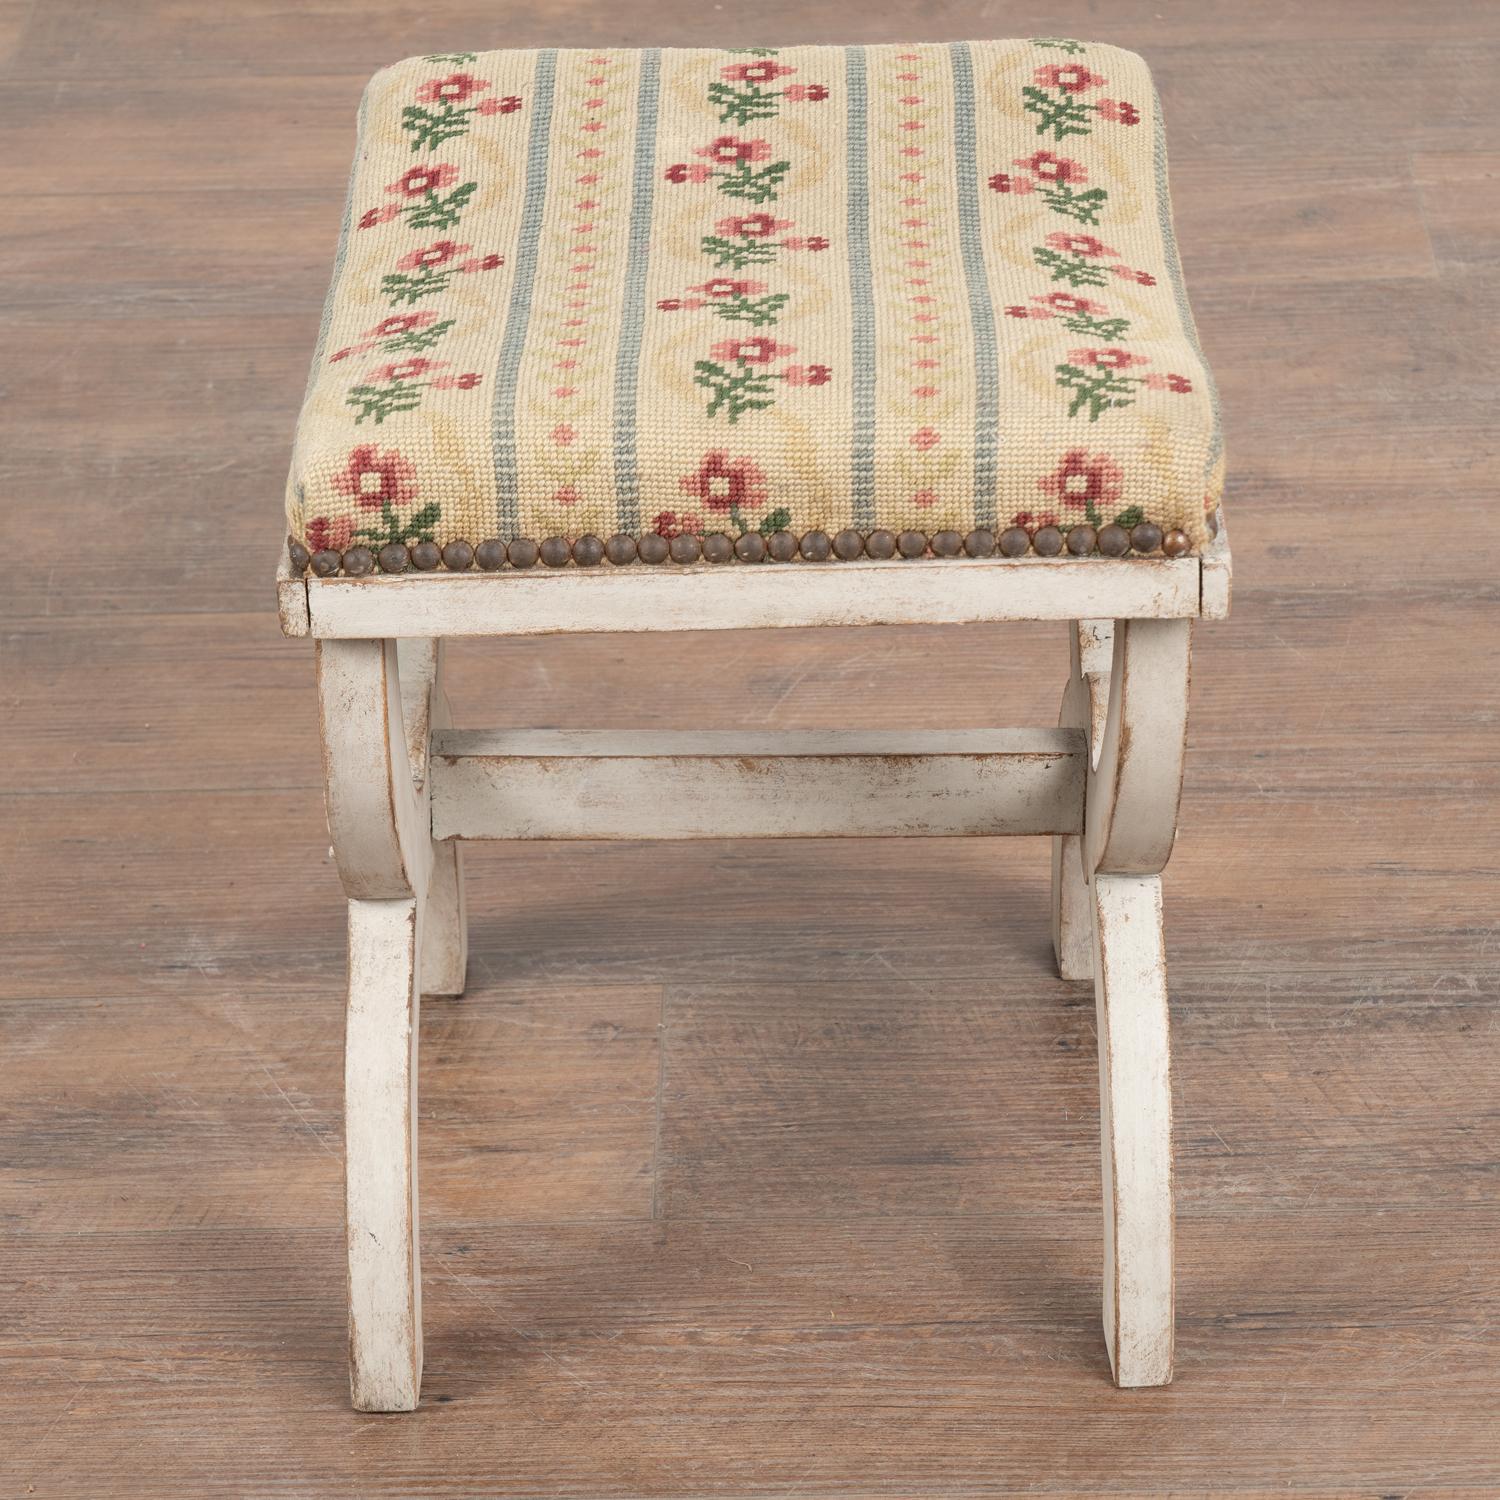 20th Century Small White Swedish Stool or Footrest, circa 1900's For Sale